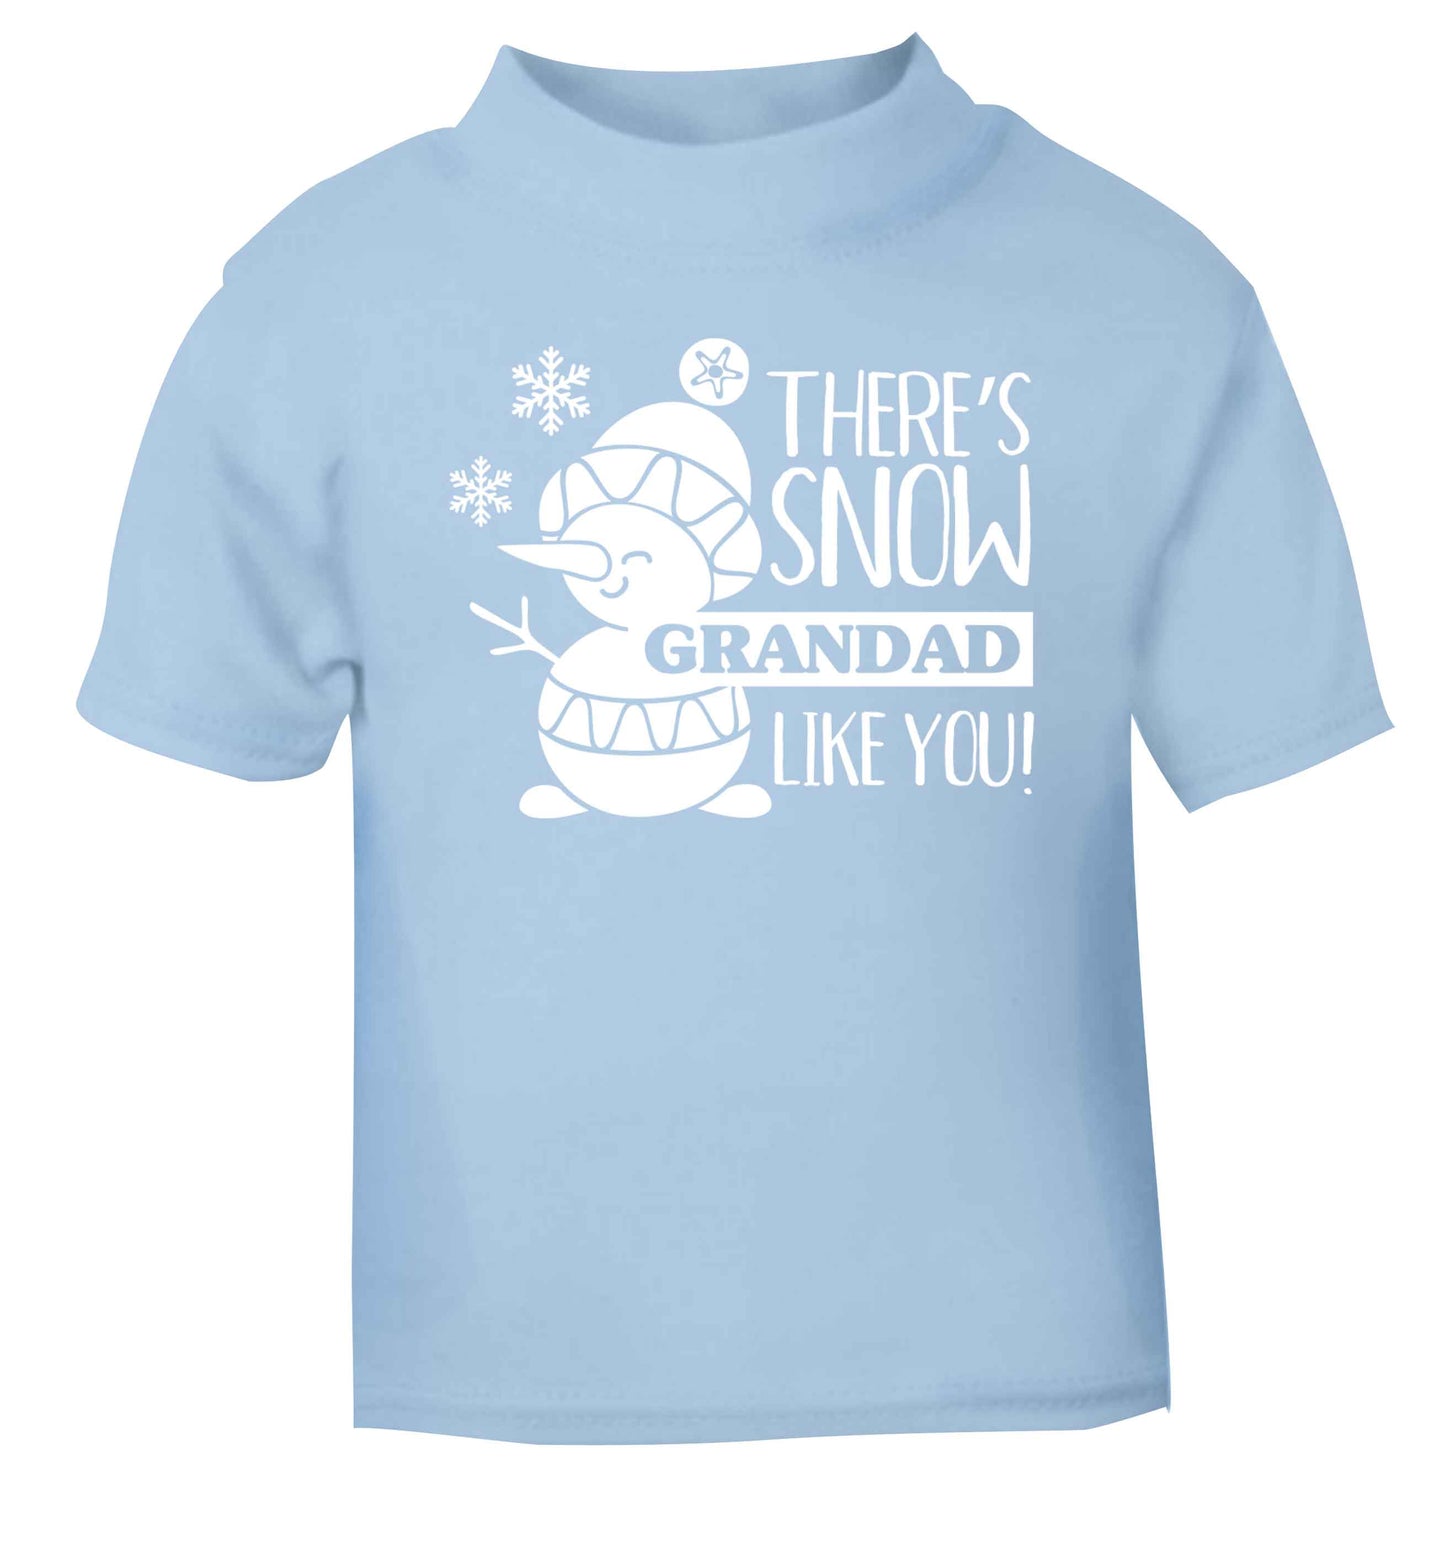 There's snow grandad like you light blue baby toddler Tshirt 2 Years